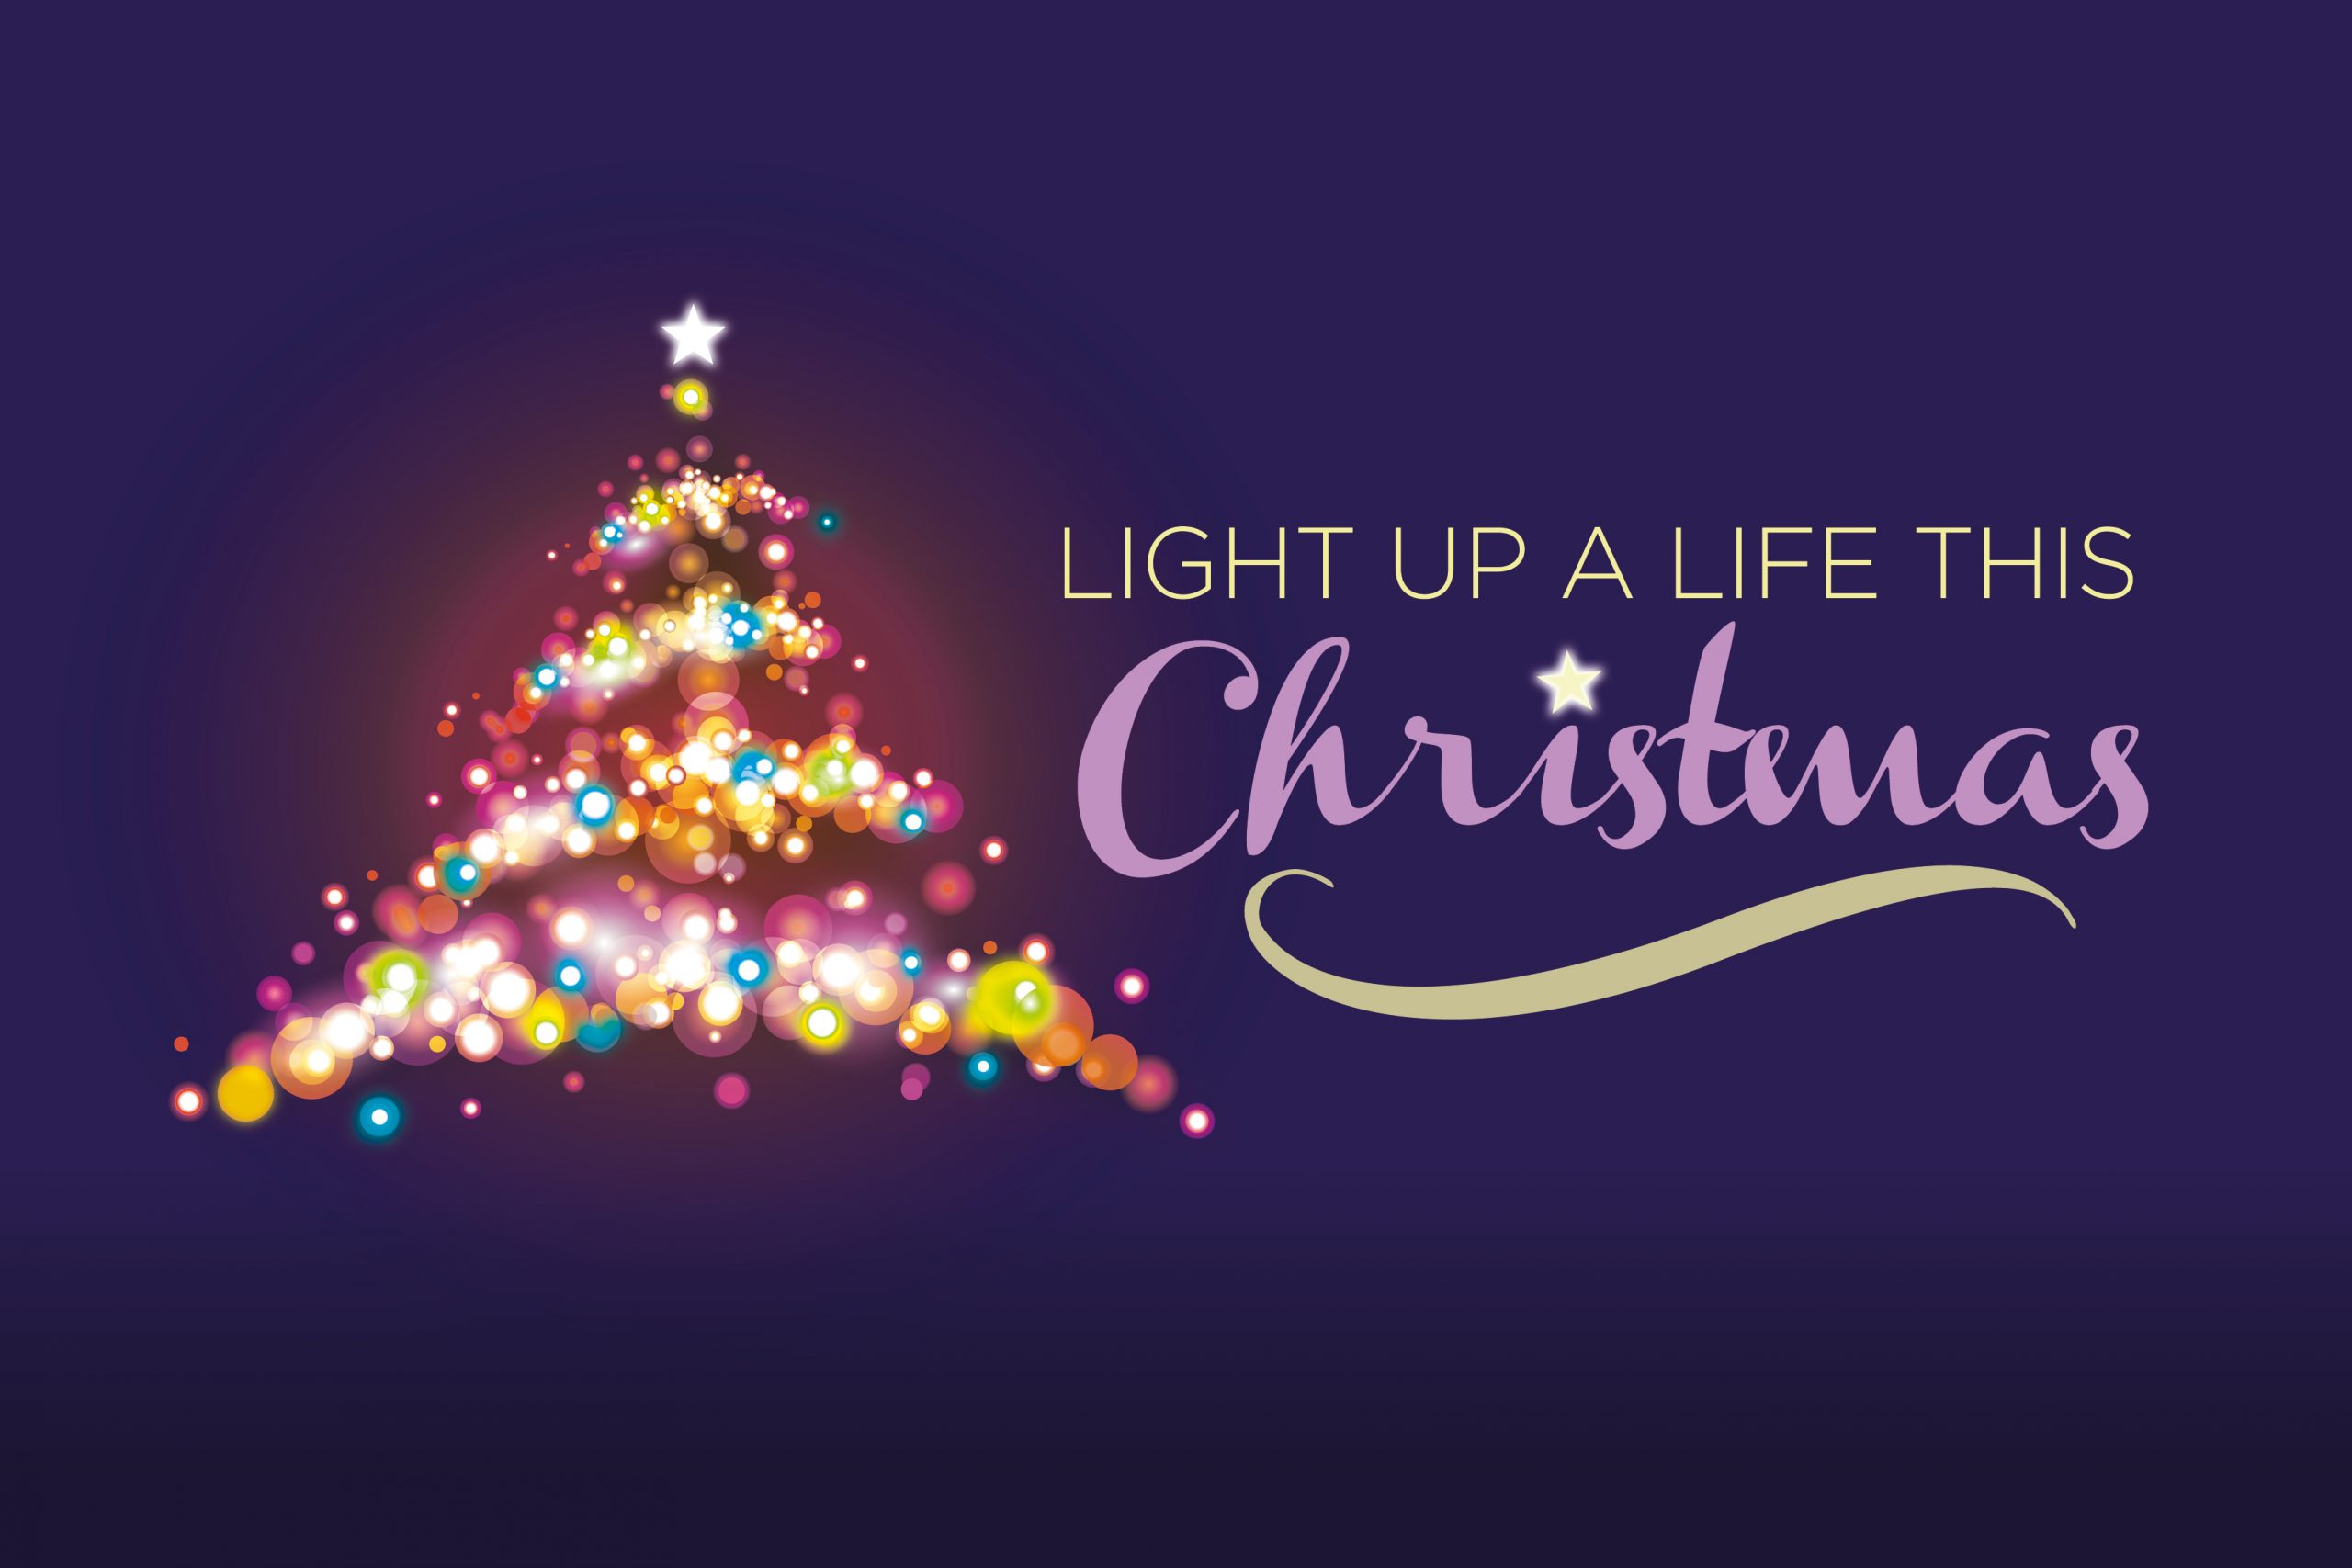 Image of Light up a life this Christmas advertisement